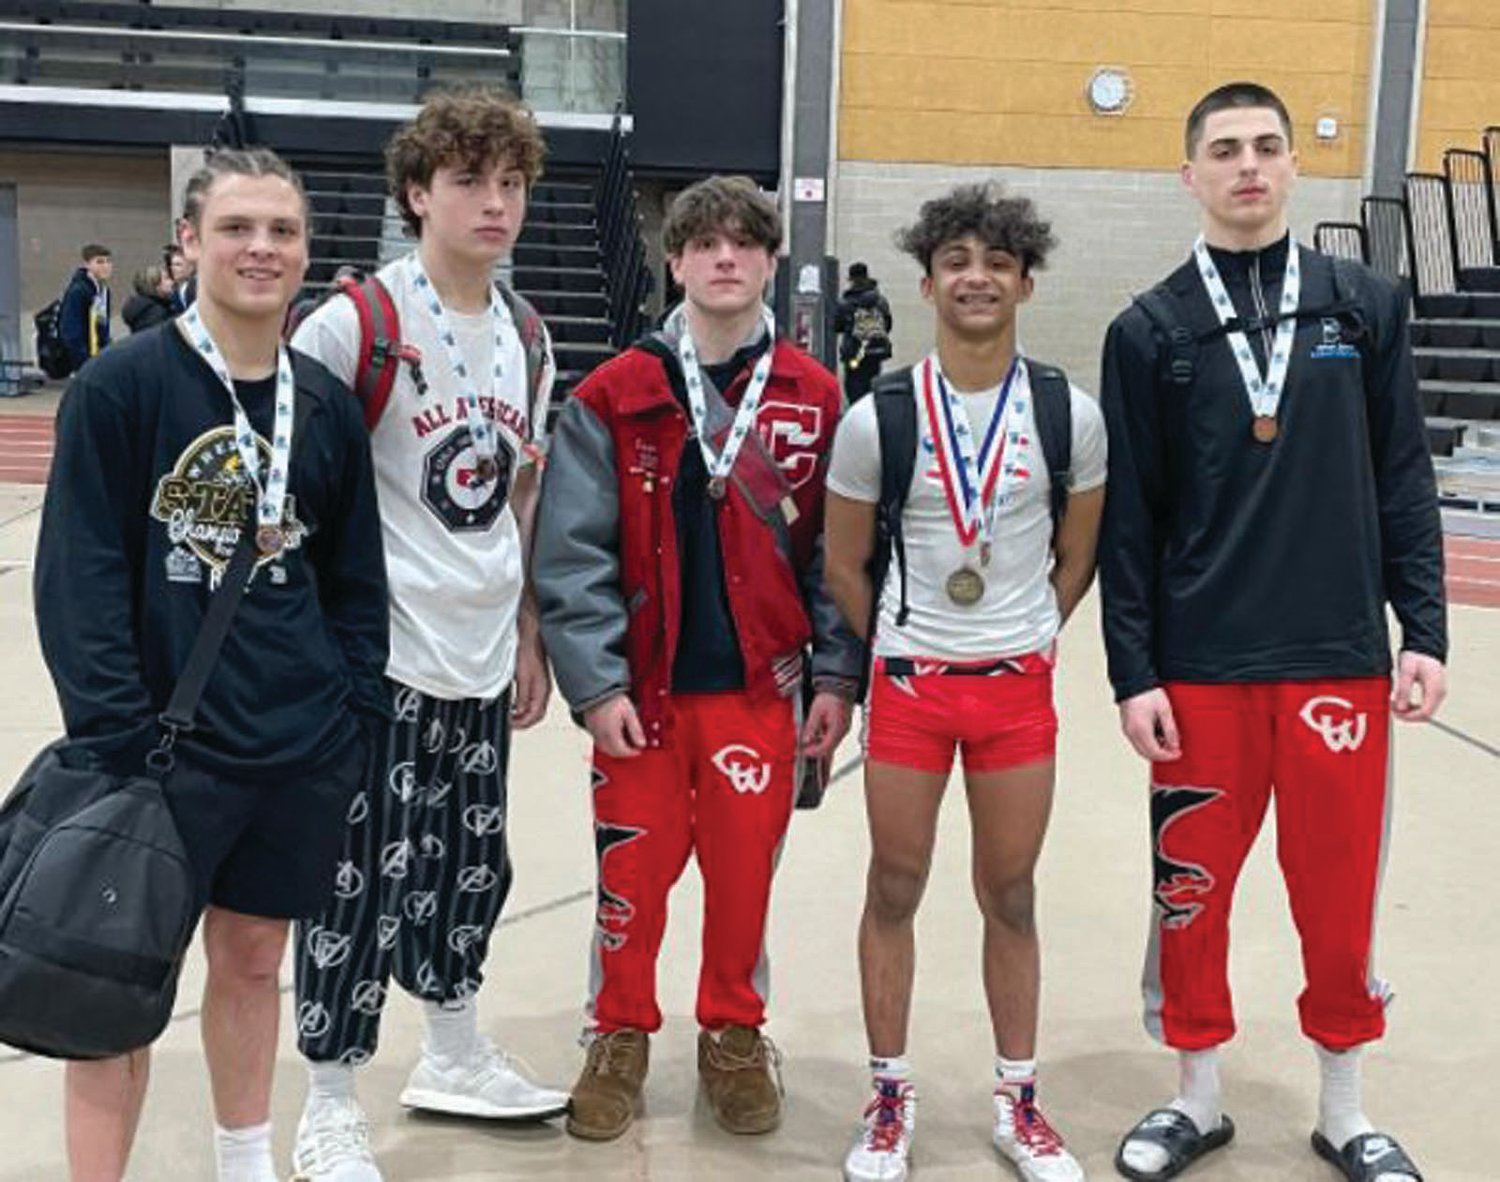 ALL-STATE: Pictured are Cranston West’s wrestlers that made it to the podium. From left: Luke Montefusco, Preston
Marchesseault, Landon Giampietro, Cam Davis and Noah Polion.